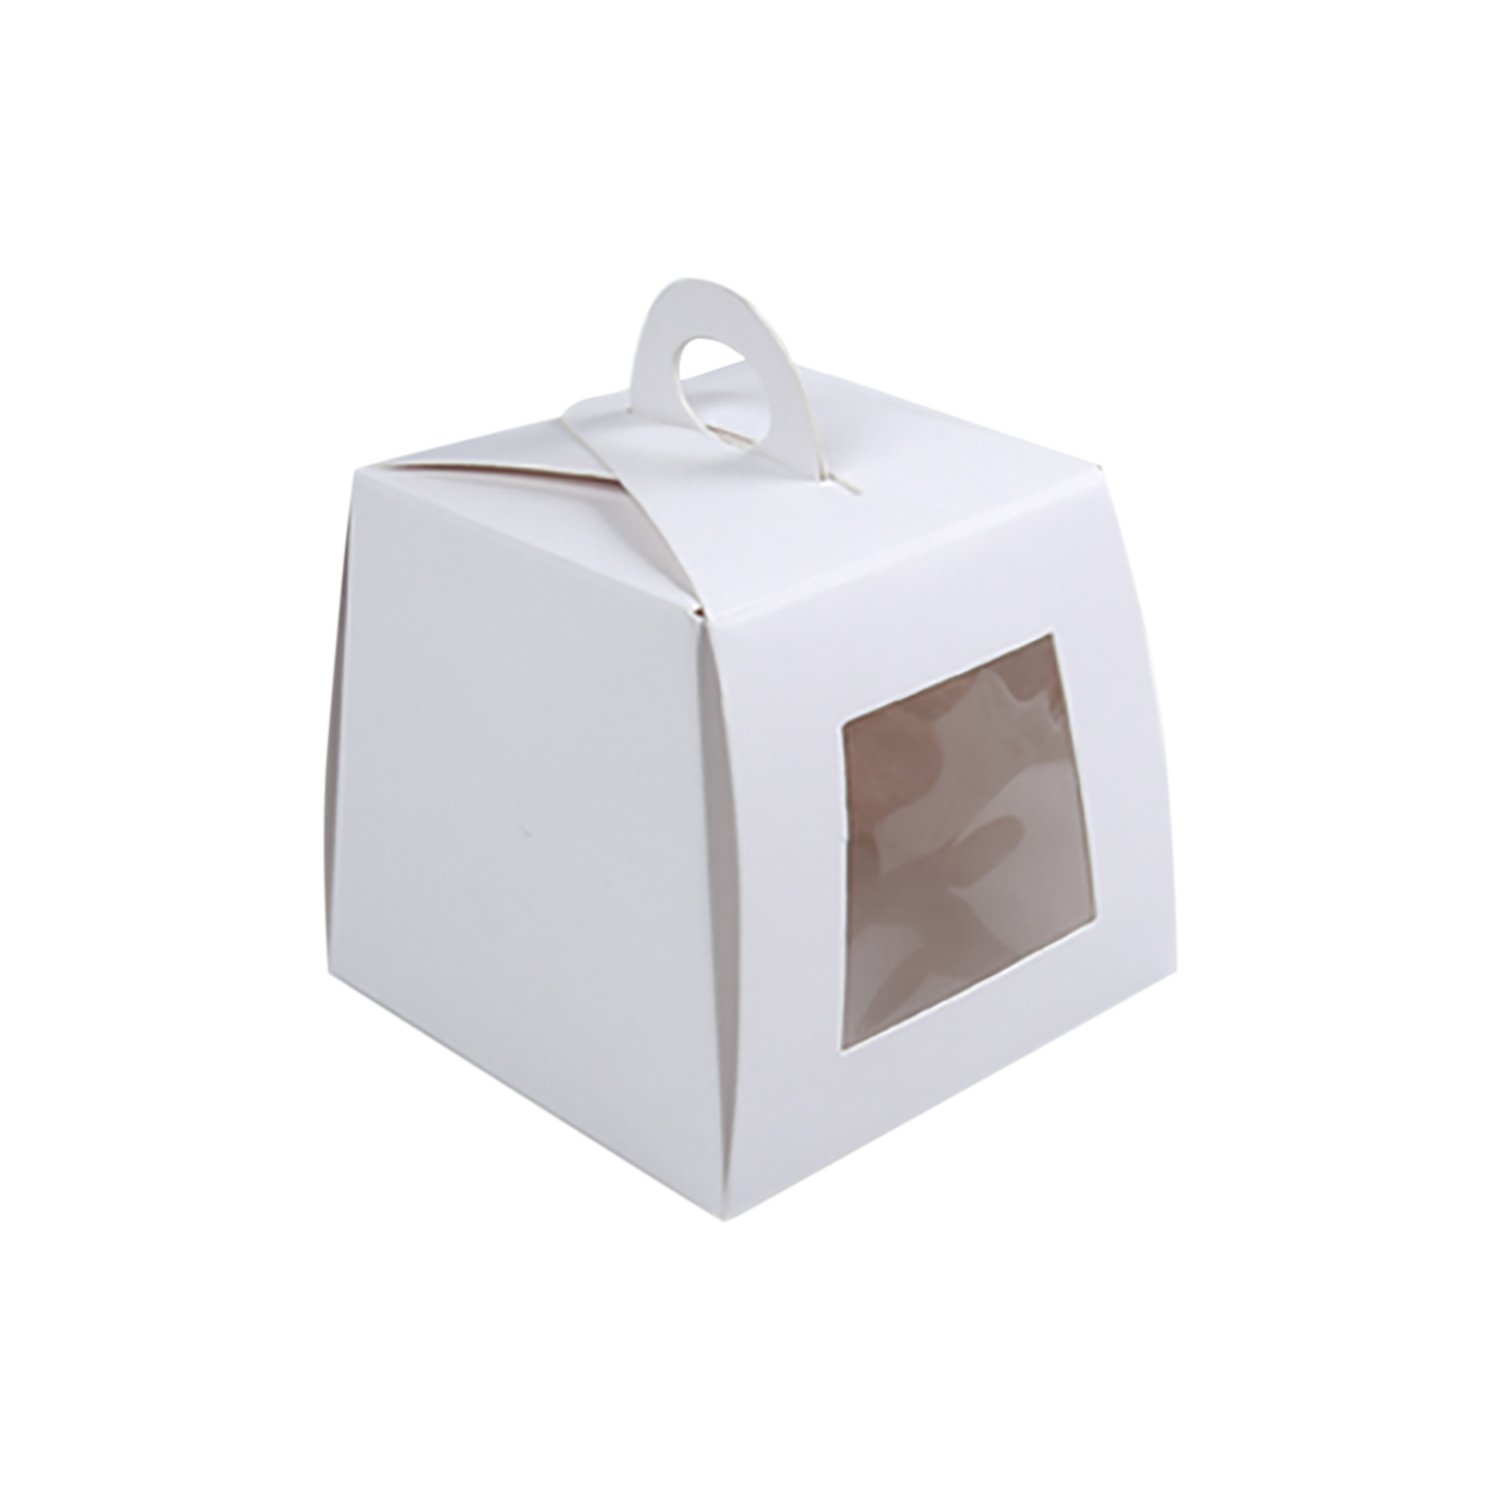 Cake Box with Open Top/Window (White Colour)